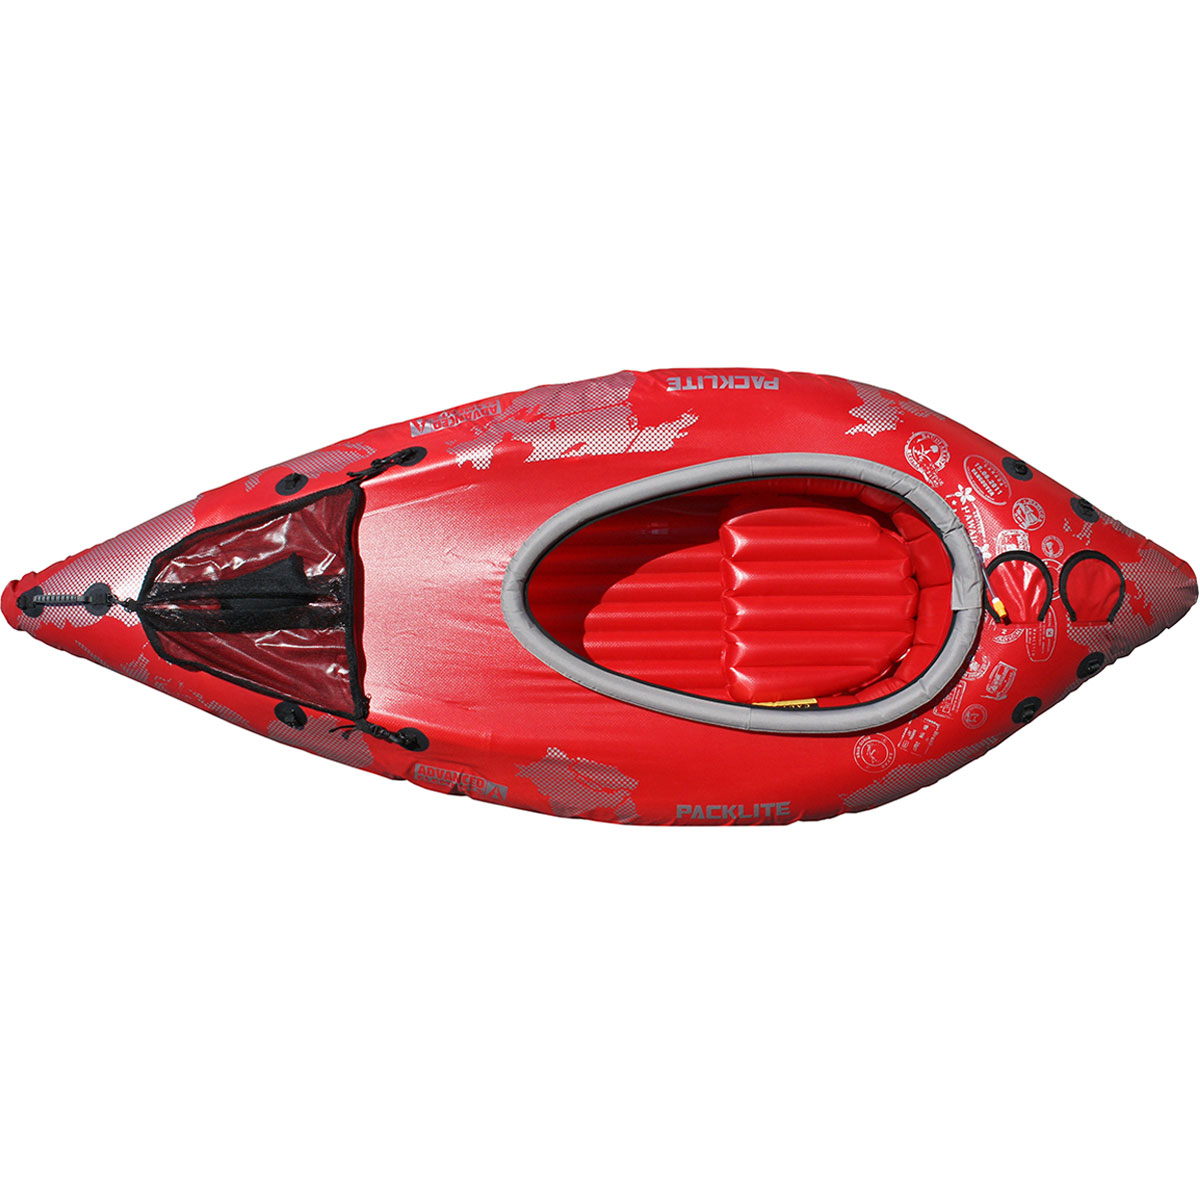 Advanced Elements Outer Kayak Cover for Packlite Kayak, Red - image 2 of 2